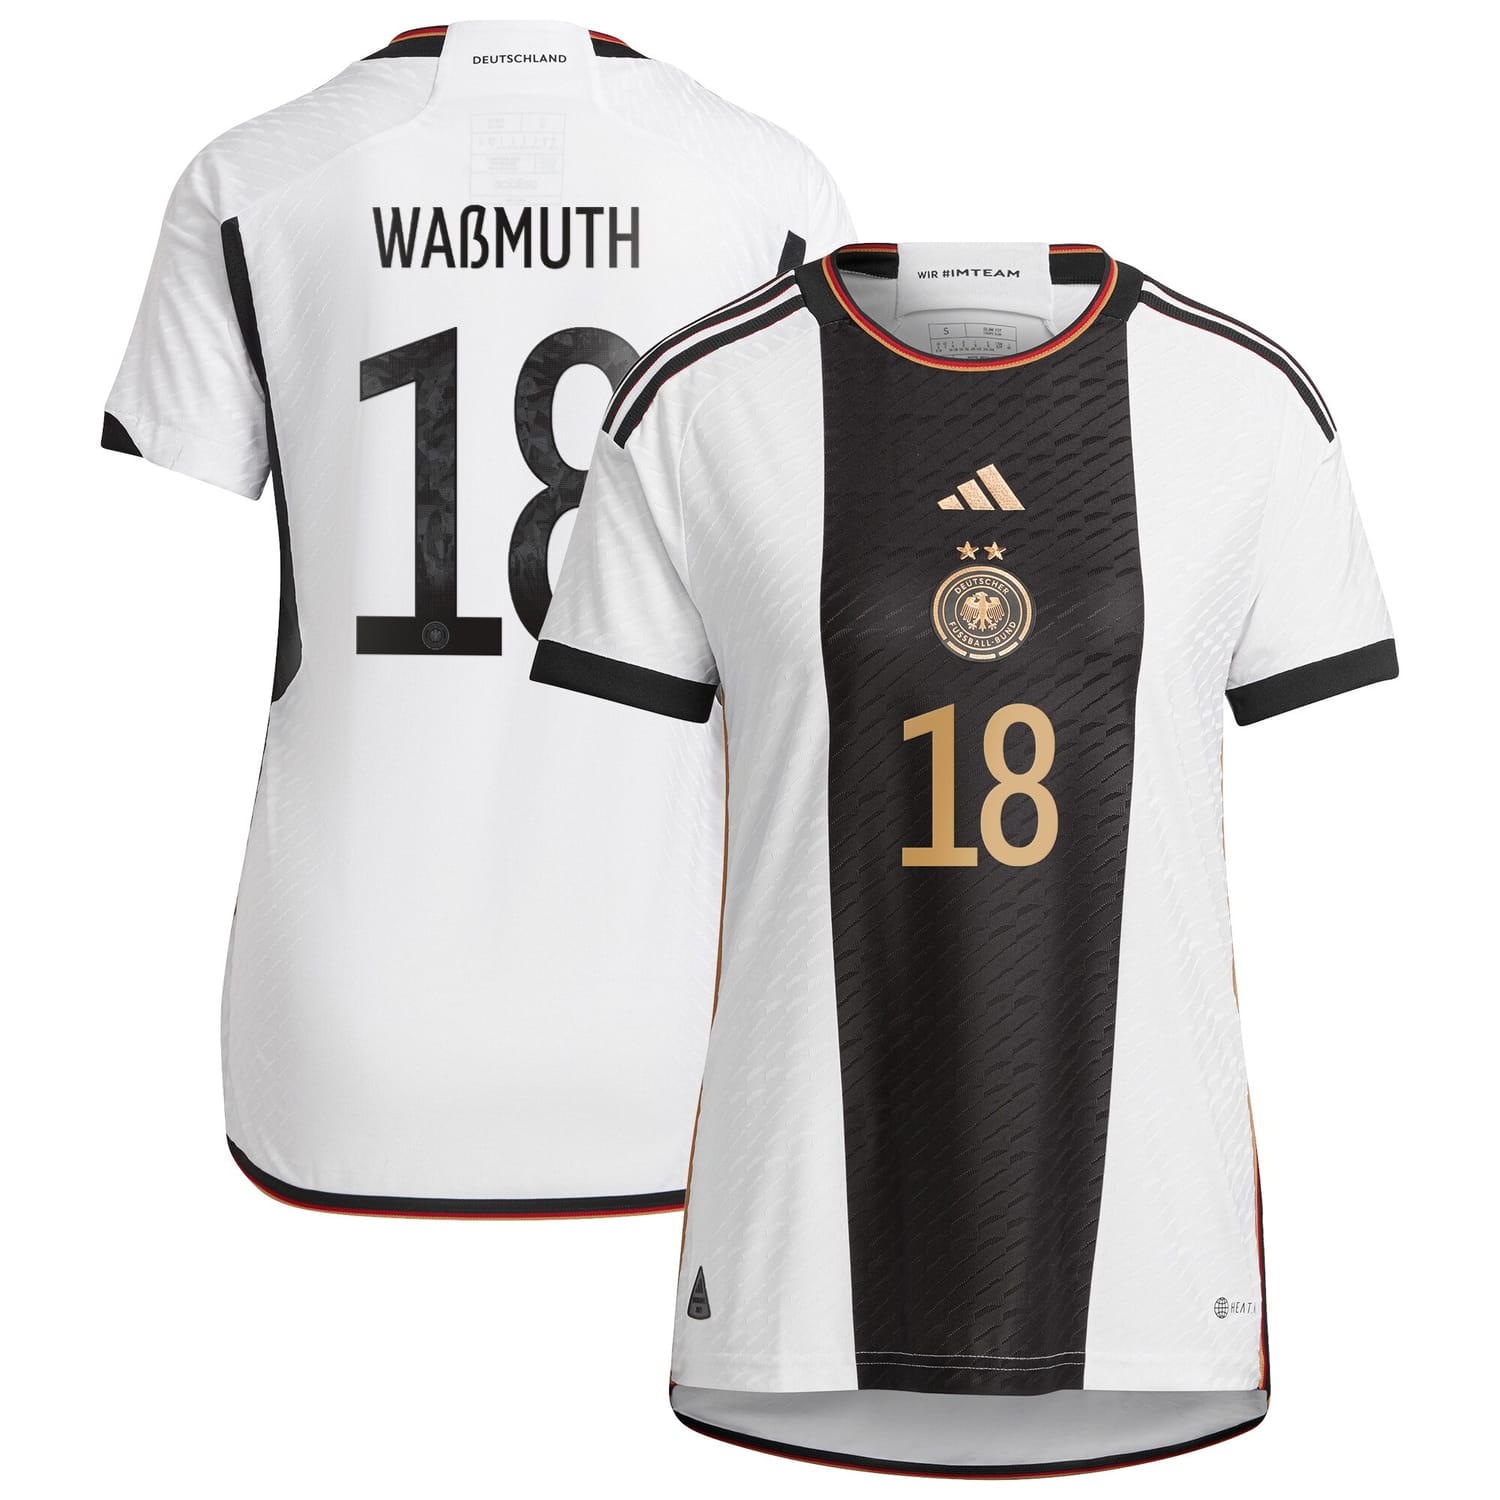 Germany National Team Home Authentic Jersey Shirt player Tabea Waßmuth 18 printing for Women